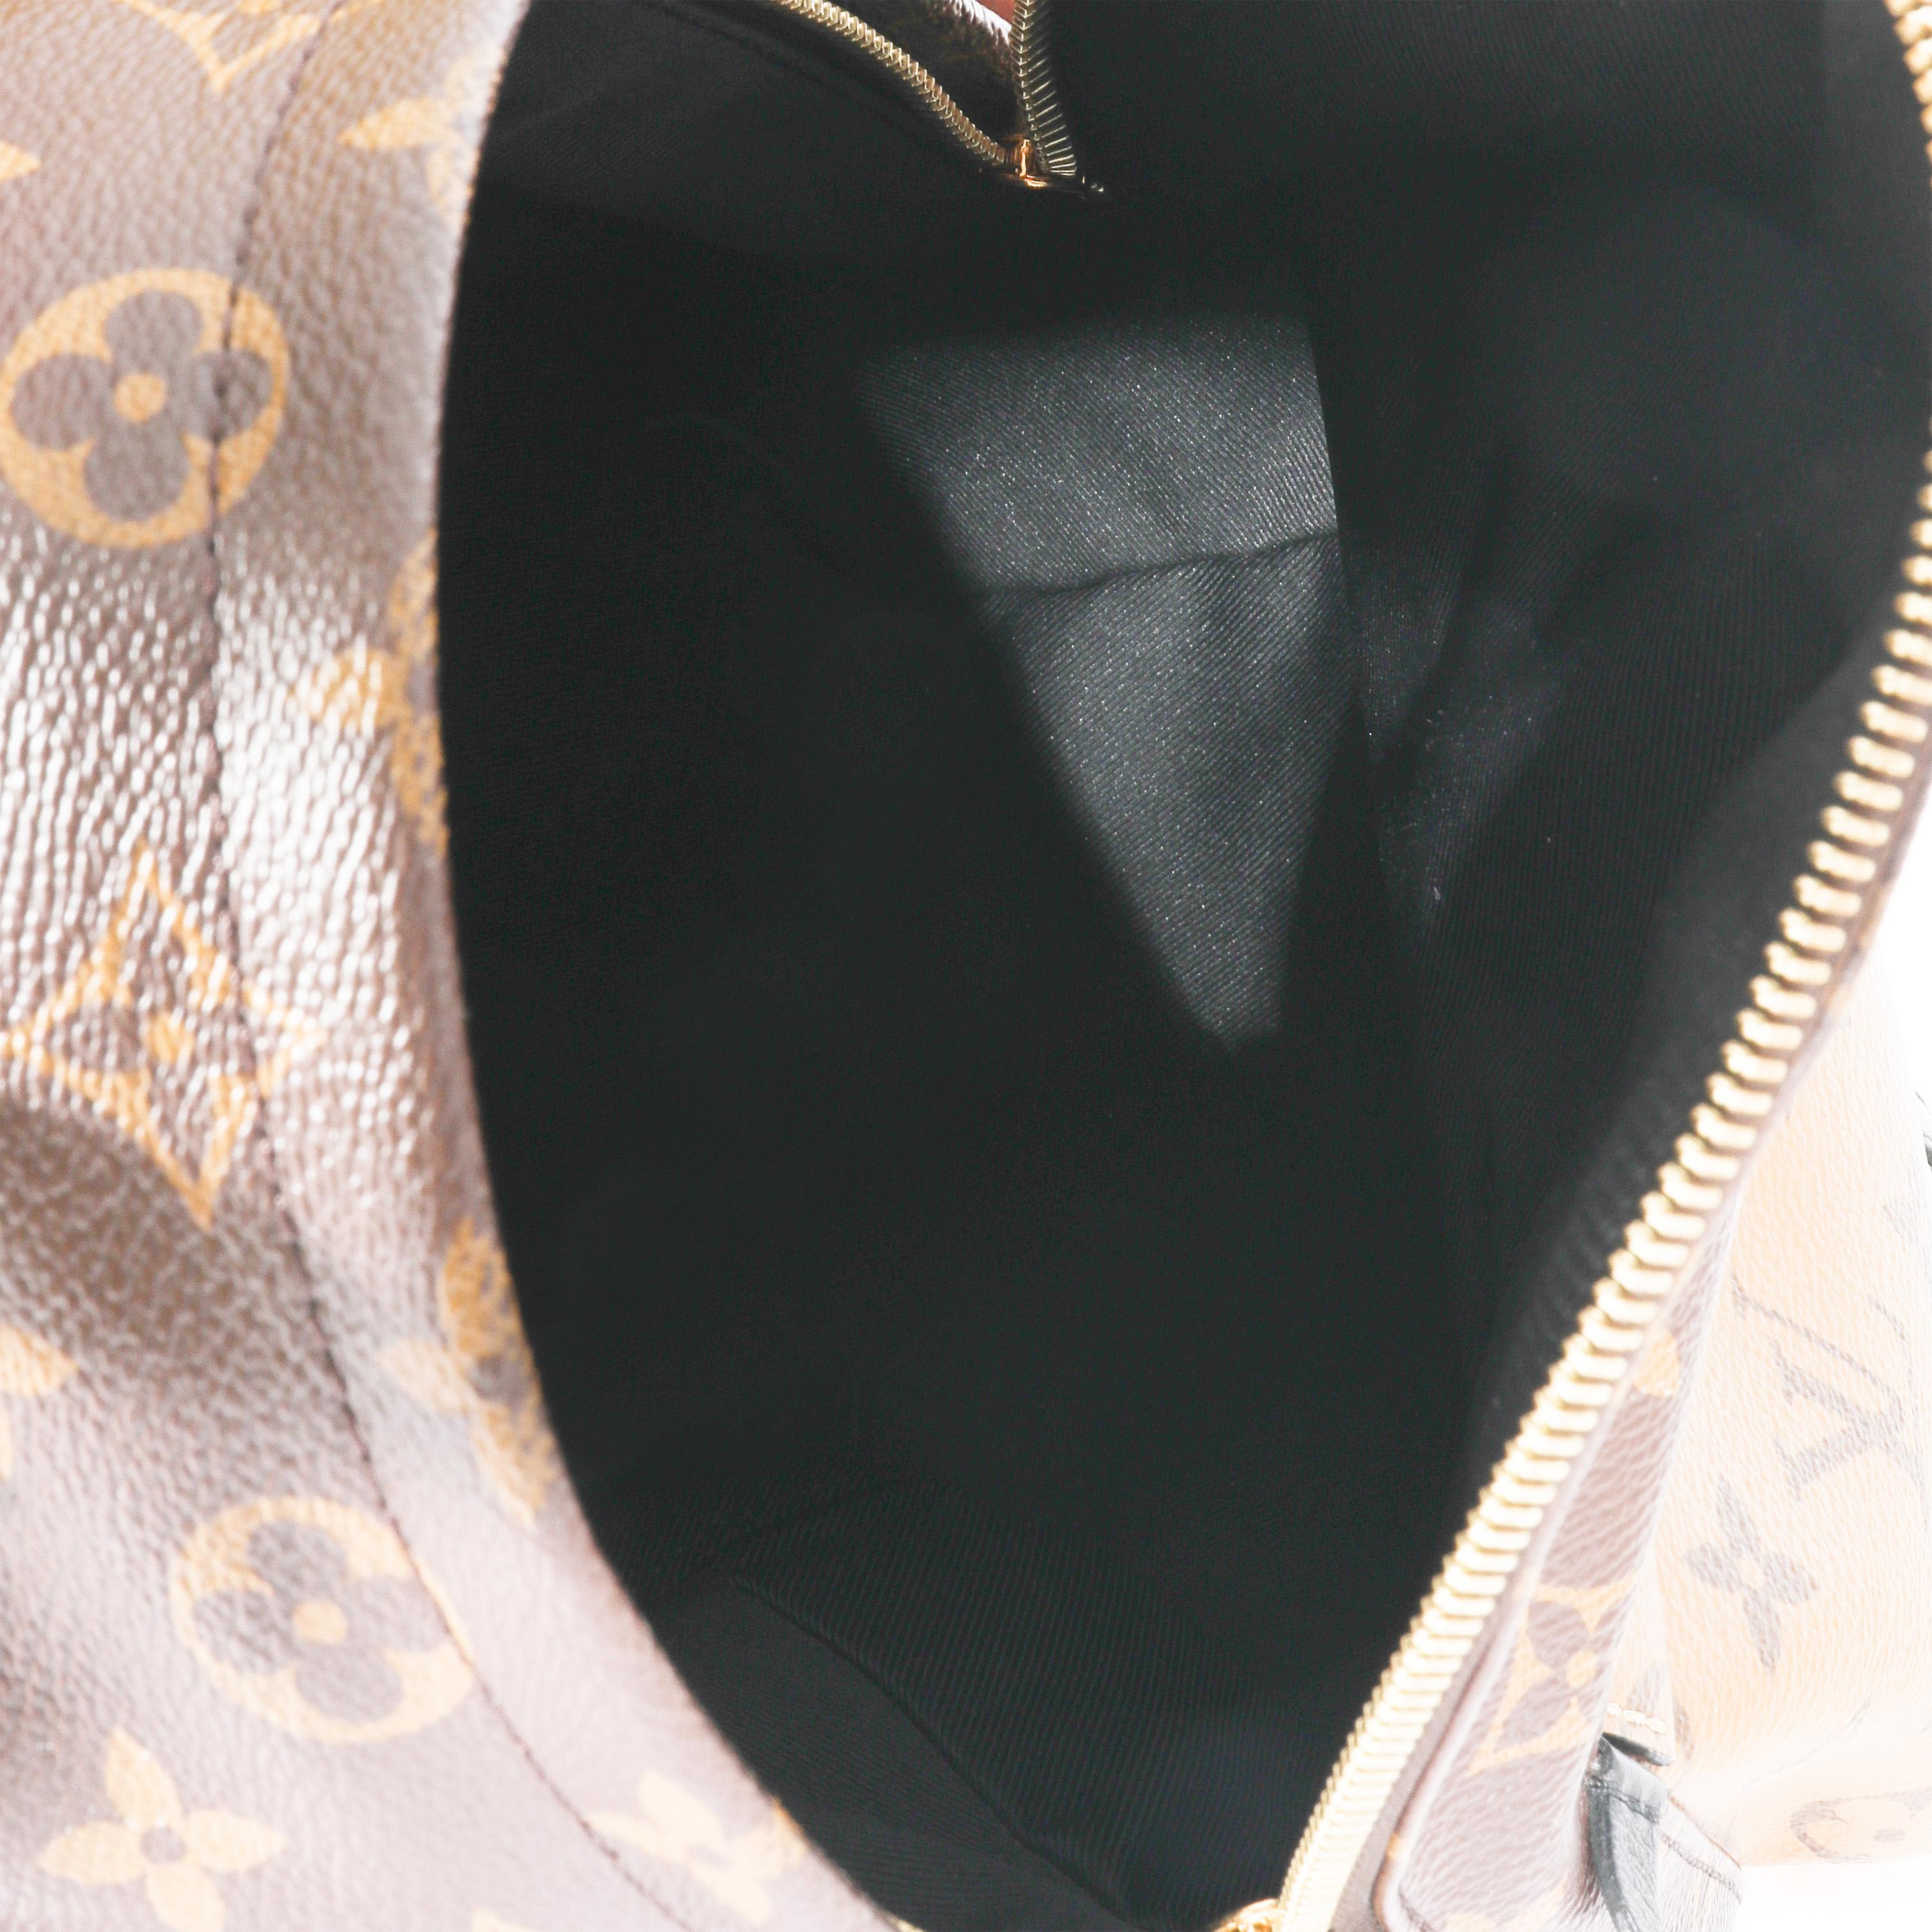 Listing Title: Louis Vuitton Canvas Reverse Monogram Palm Spring PM
 SKU: 128647
 MSRP: 2570.00
 Condition: Pre-owned 
 Handbag Condition: Very Good
 Condition Comments: Very Good Condition. Exterior corner scuffing and at straps. Scratching at